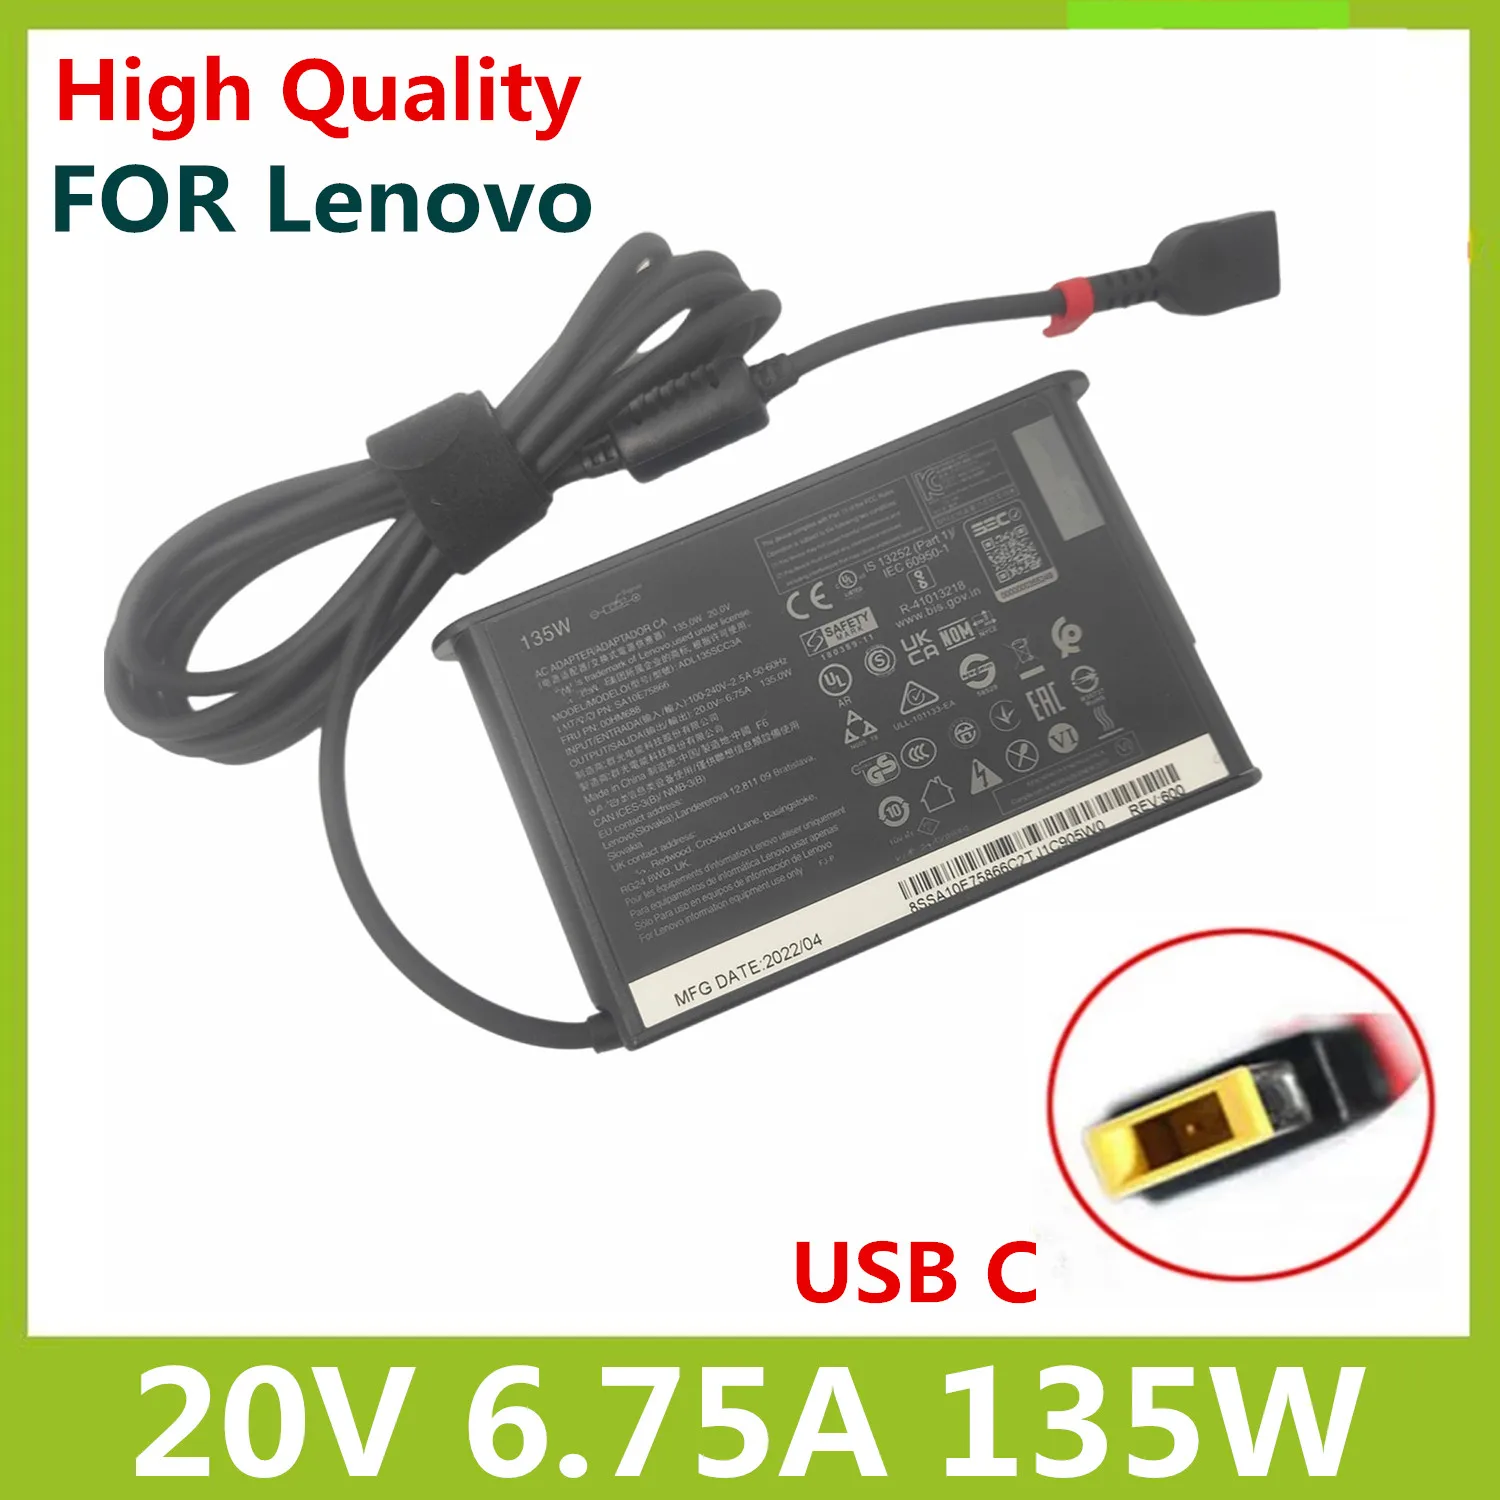 

Original 20V 6.75A 135W USB C Laptop AC Power Adapter For Lenovo T440p T540p Y50-70 ADL135NDC3A 45N0361 45N0501 Notebook Charger